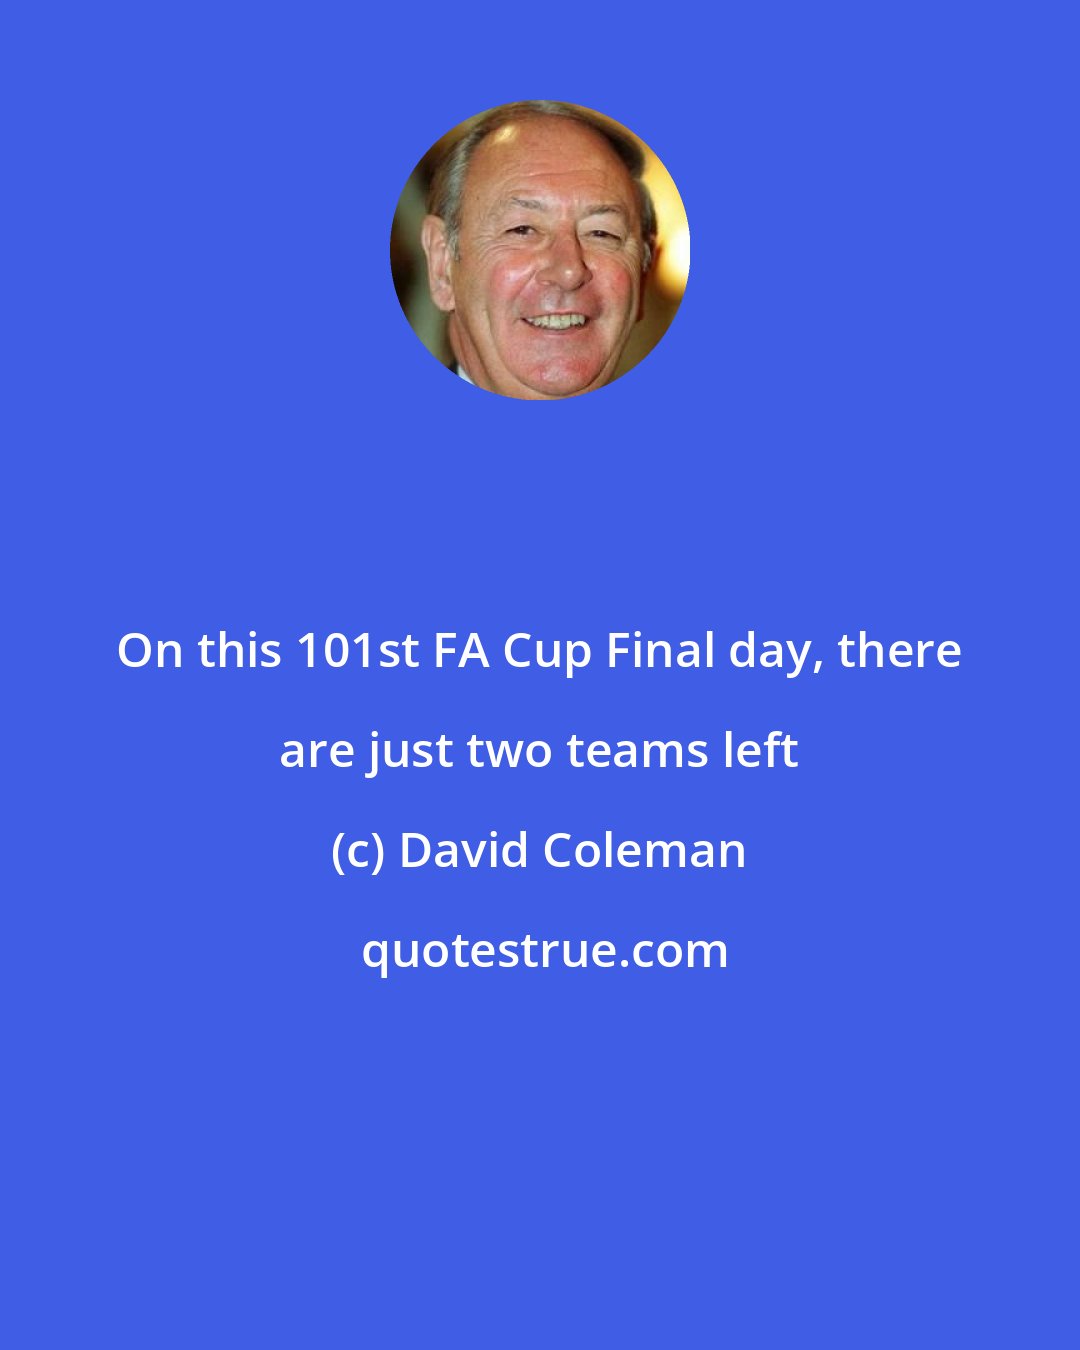 David Coleman: On this 101st FA Cup Final day, there are just two teams left